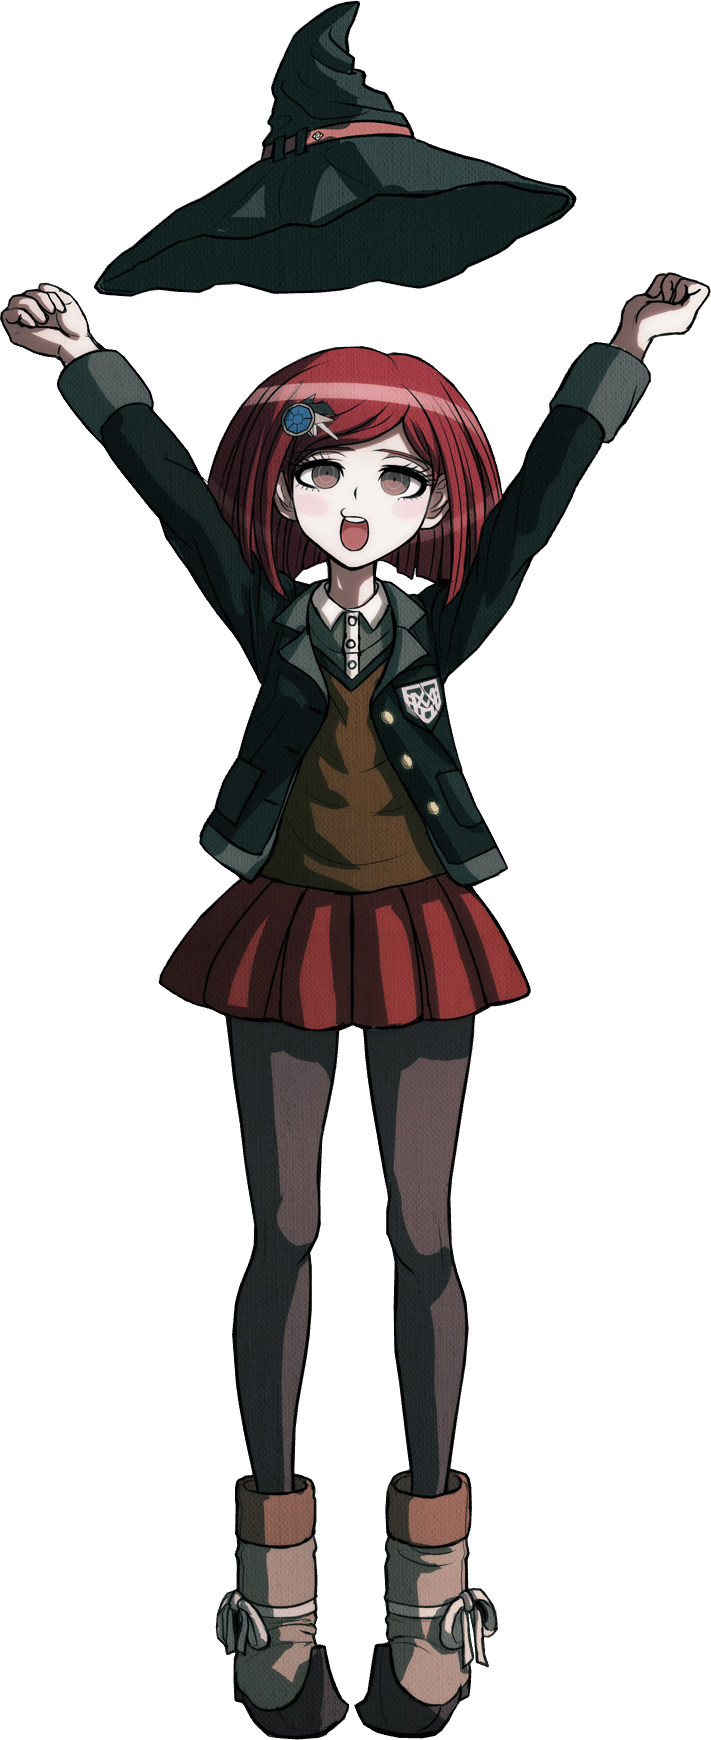 Anime himiko toga PNG Beeld achtergrond